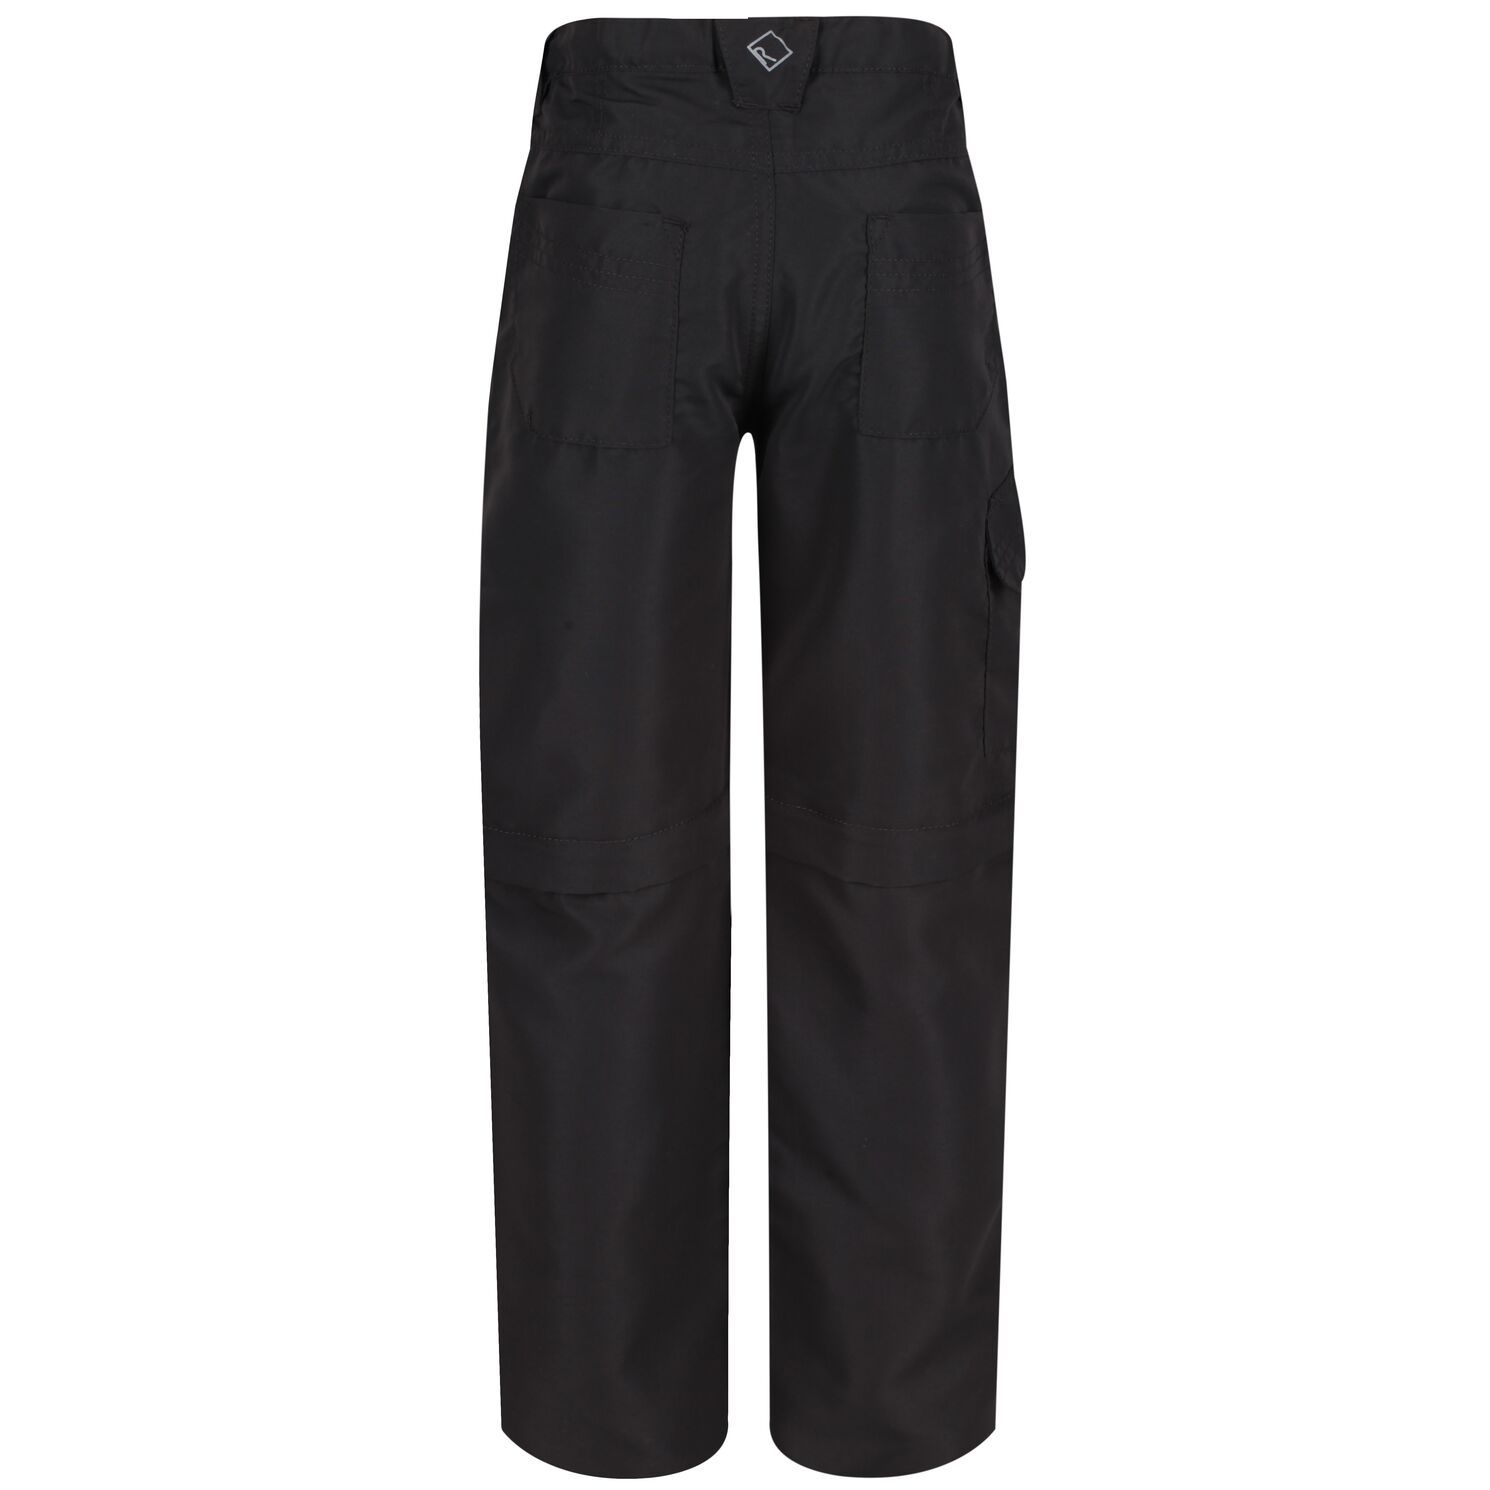 Material: 100% Polyester. Durable, water repellent and lightweight trousers with zip-off legs which convert them into shorts. Part-elasticated waist with button adjustment system. Multi pocketed. Ideal for day trips in changeable weather and overnight stays.